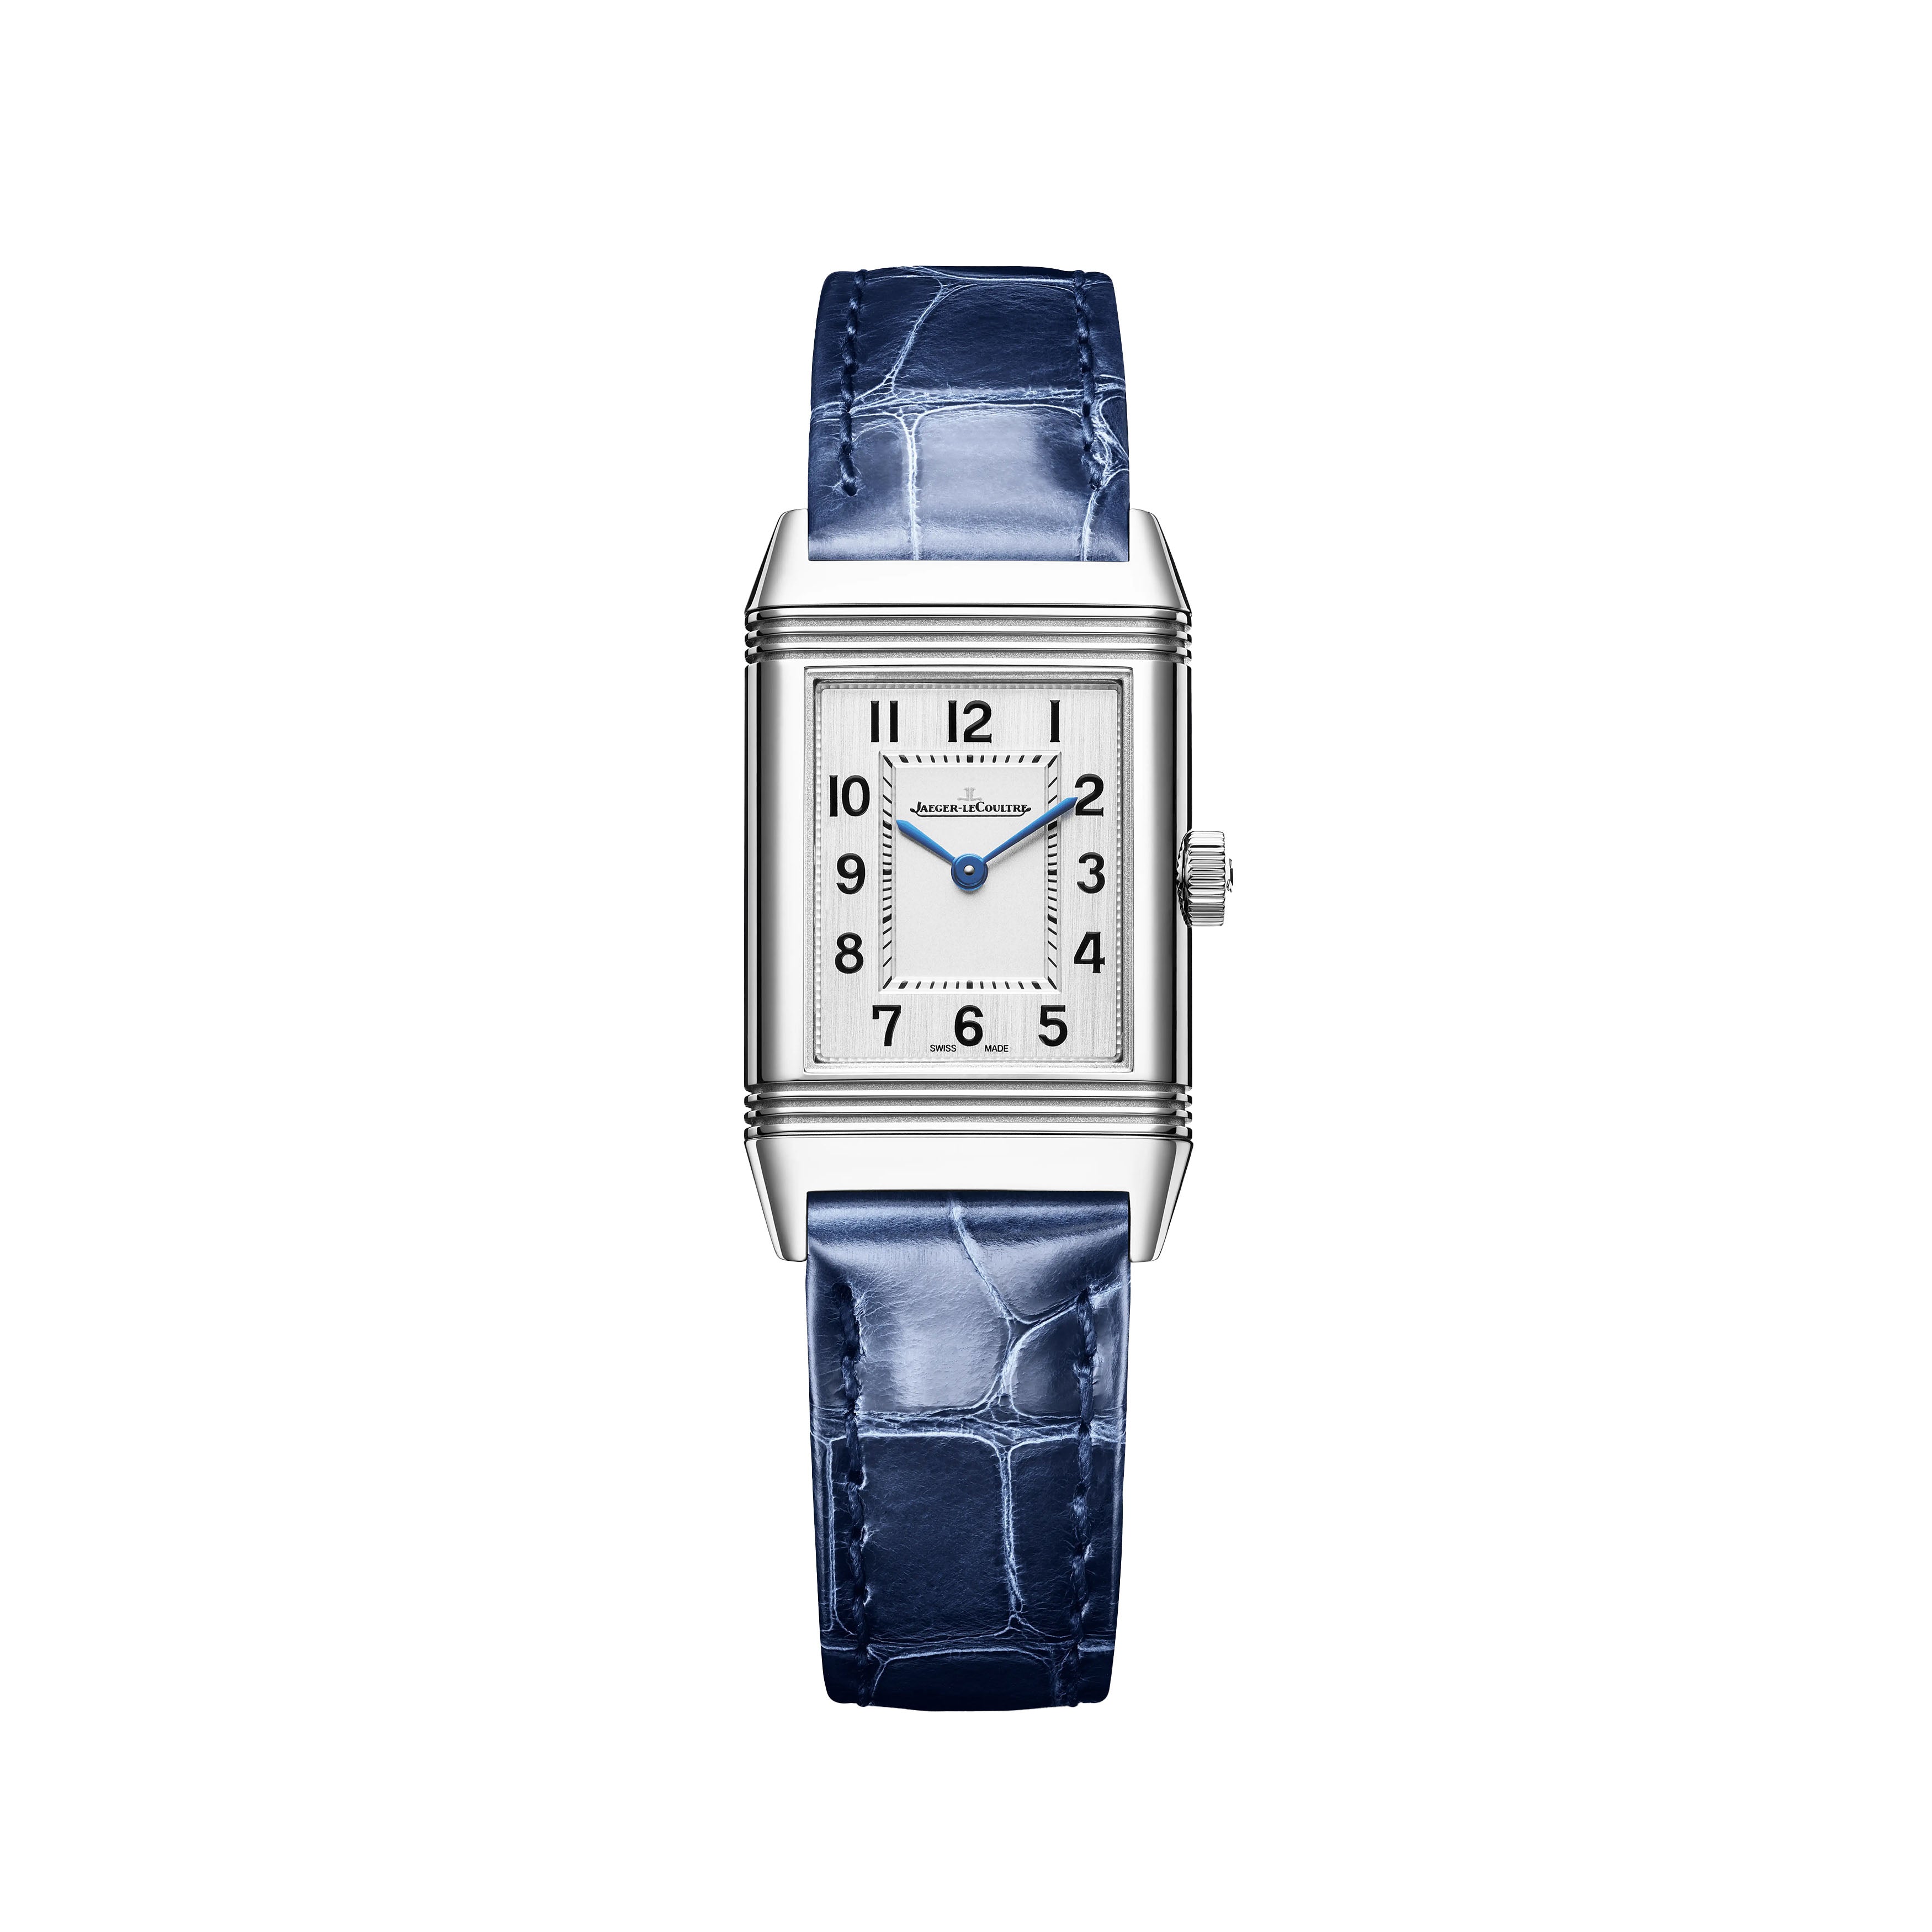 Jaeger-LeCoultre Reverso Classic Monoface Watch, 35.78x21mm Silver Dial, Q2618540